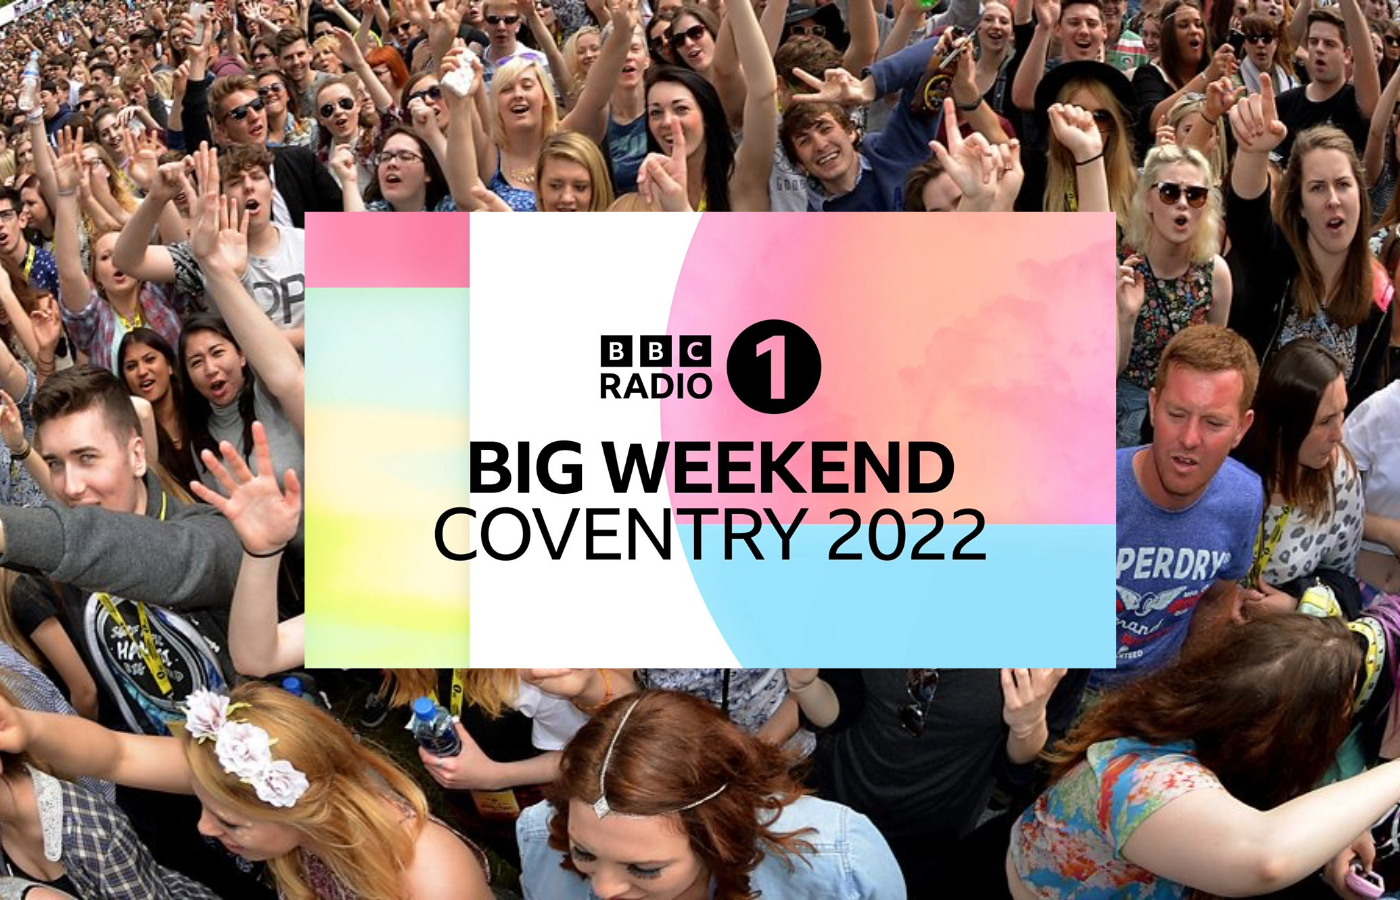 BBC Radio 1 Target audience - Shows Big Weekend in Coventry